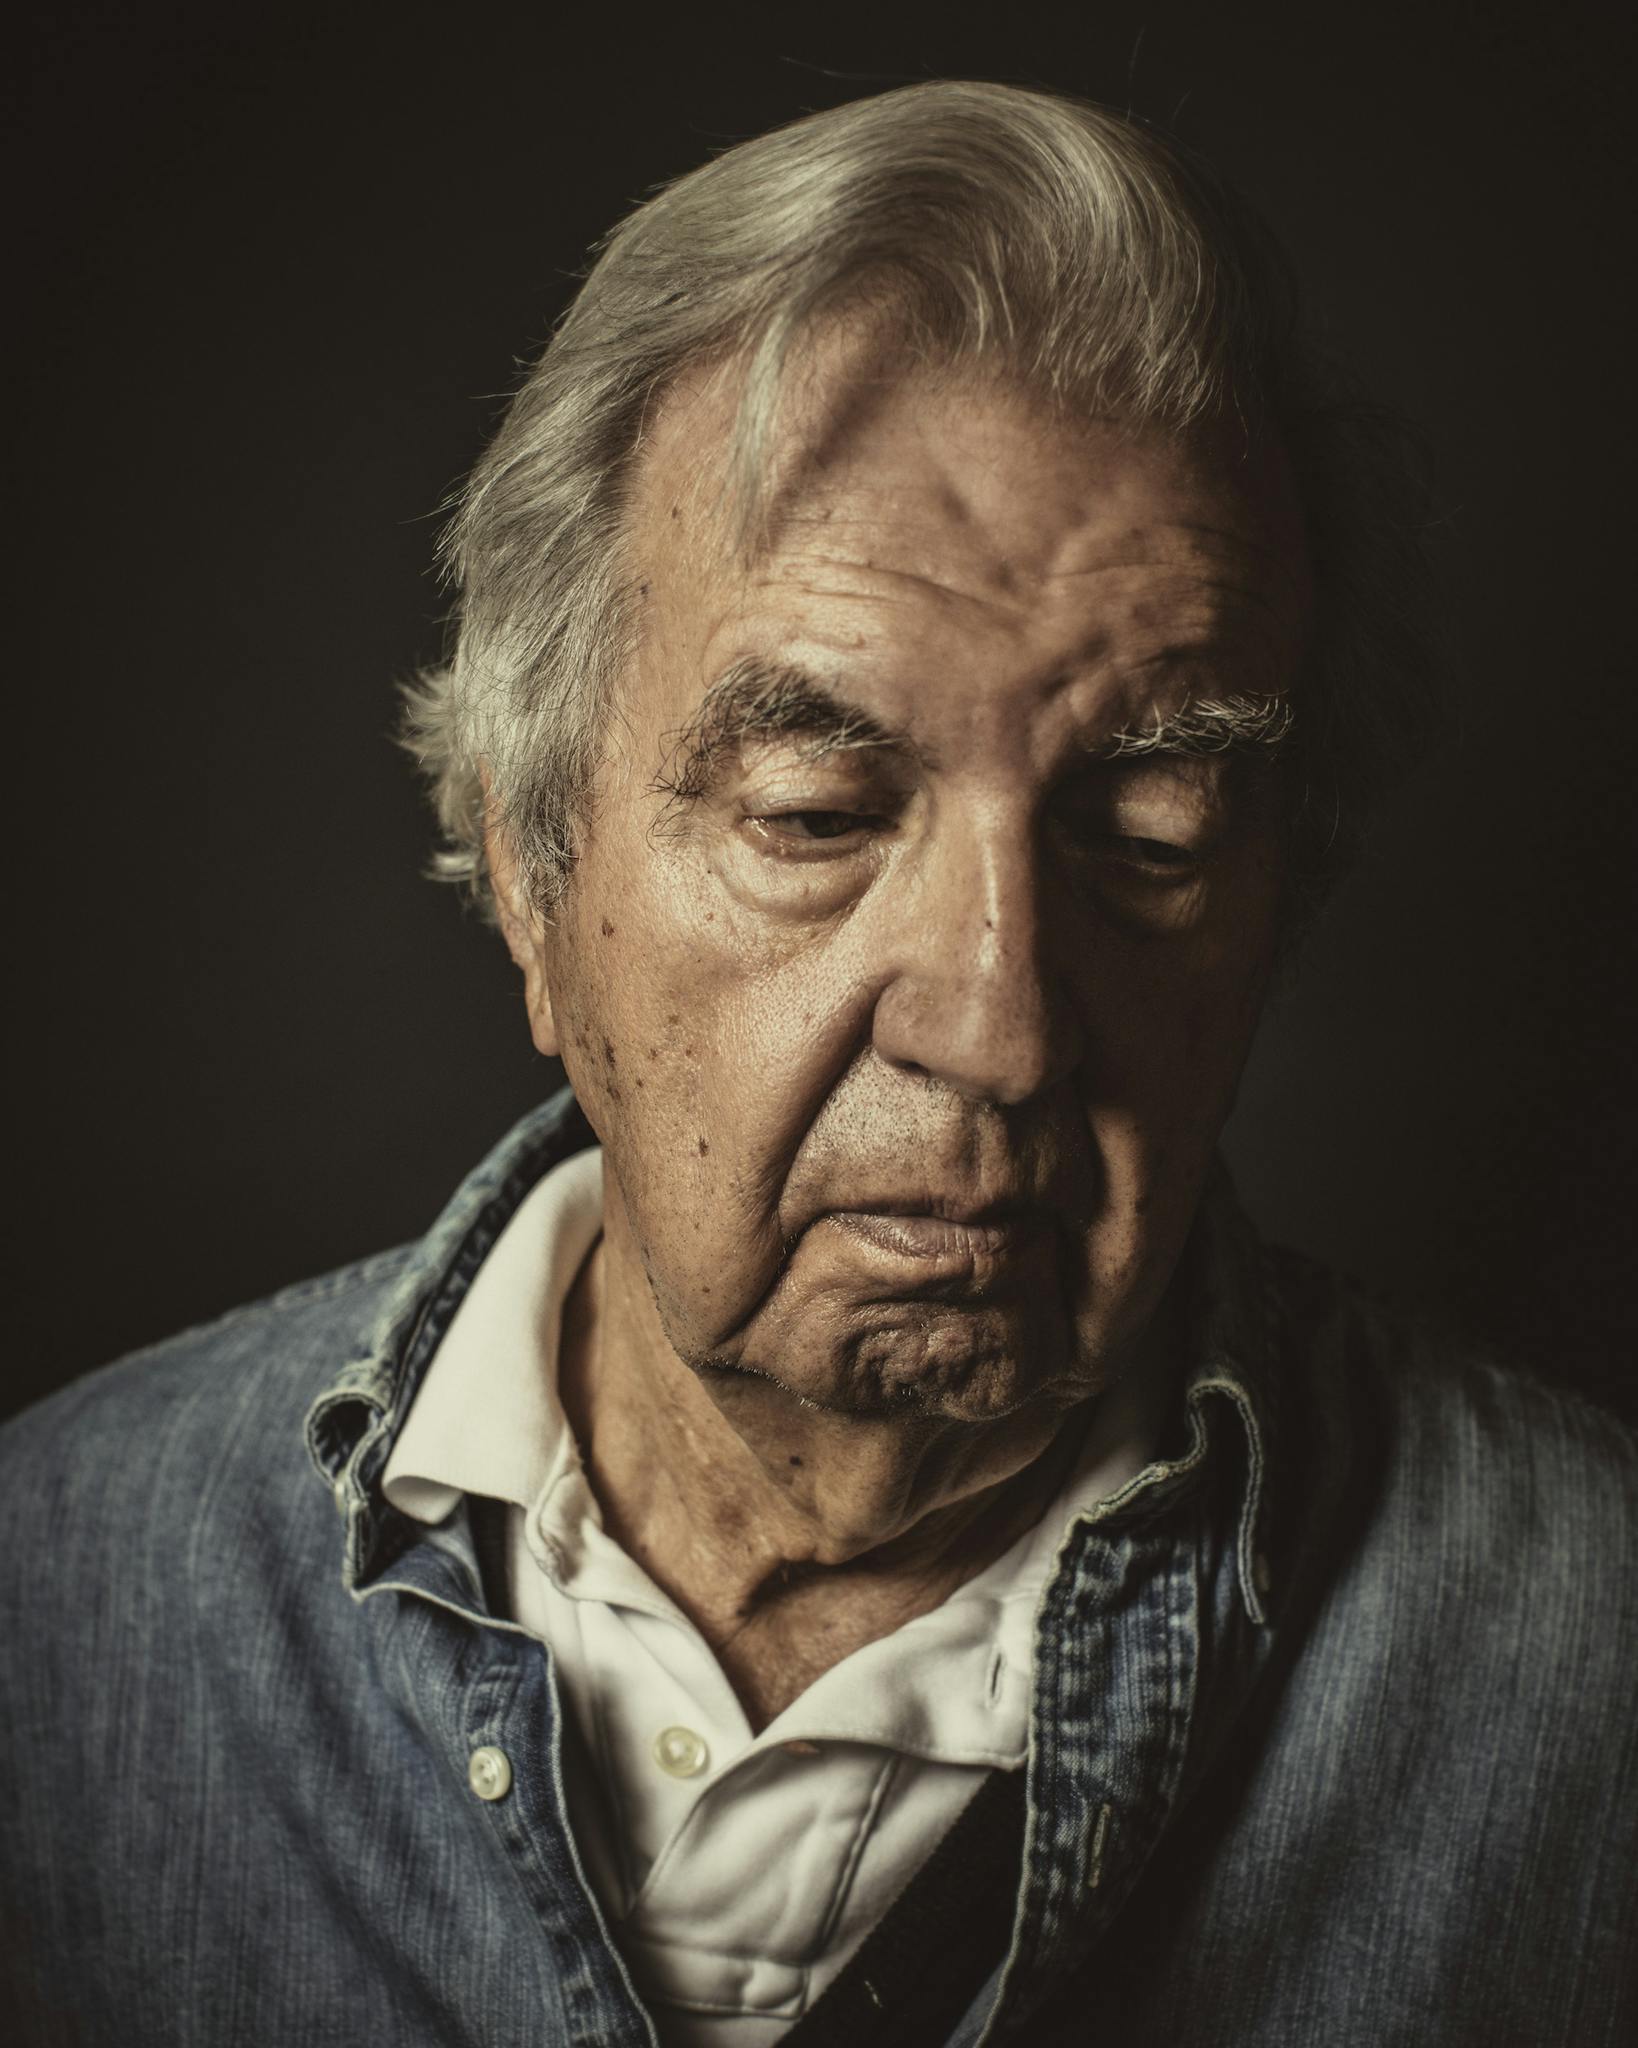 Larry McMurtry photographed in 2016.